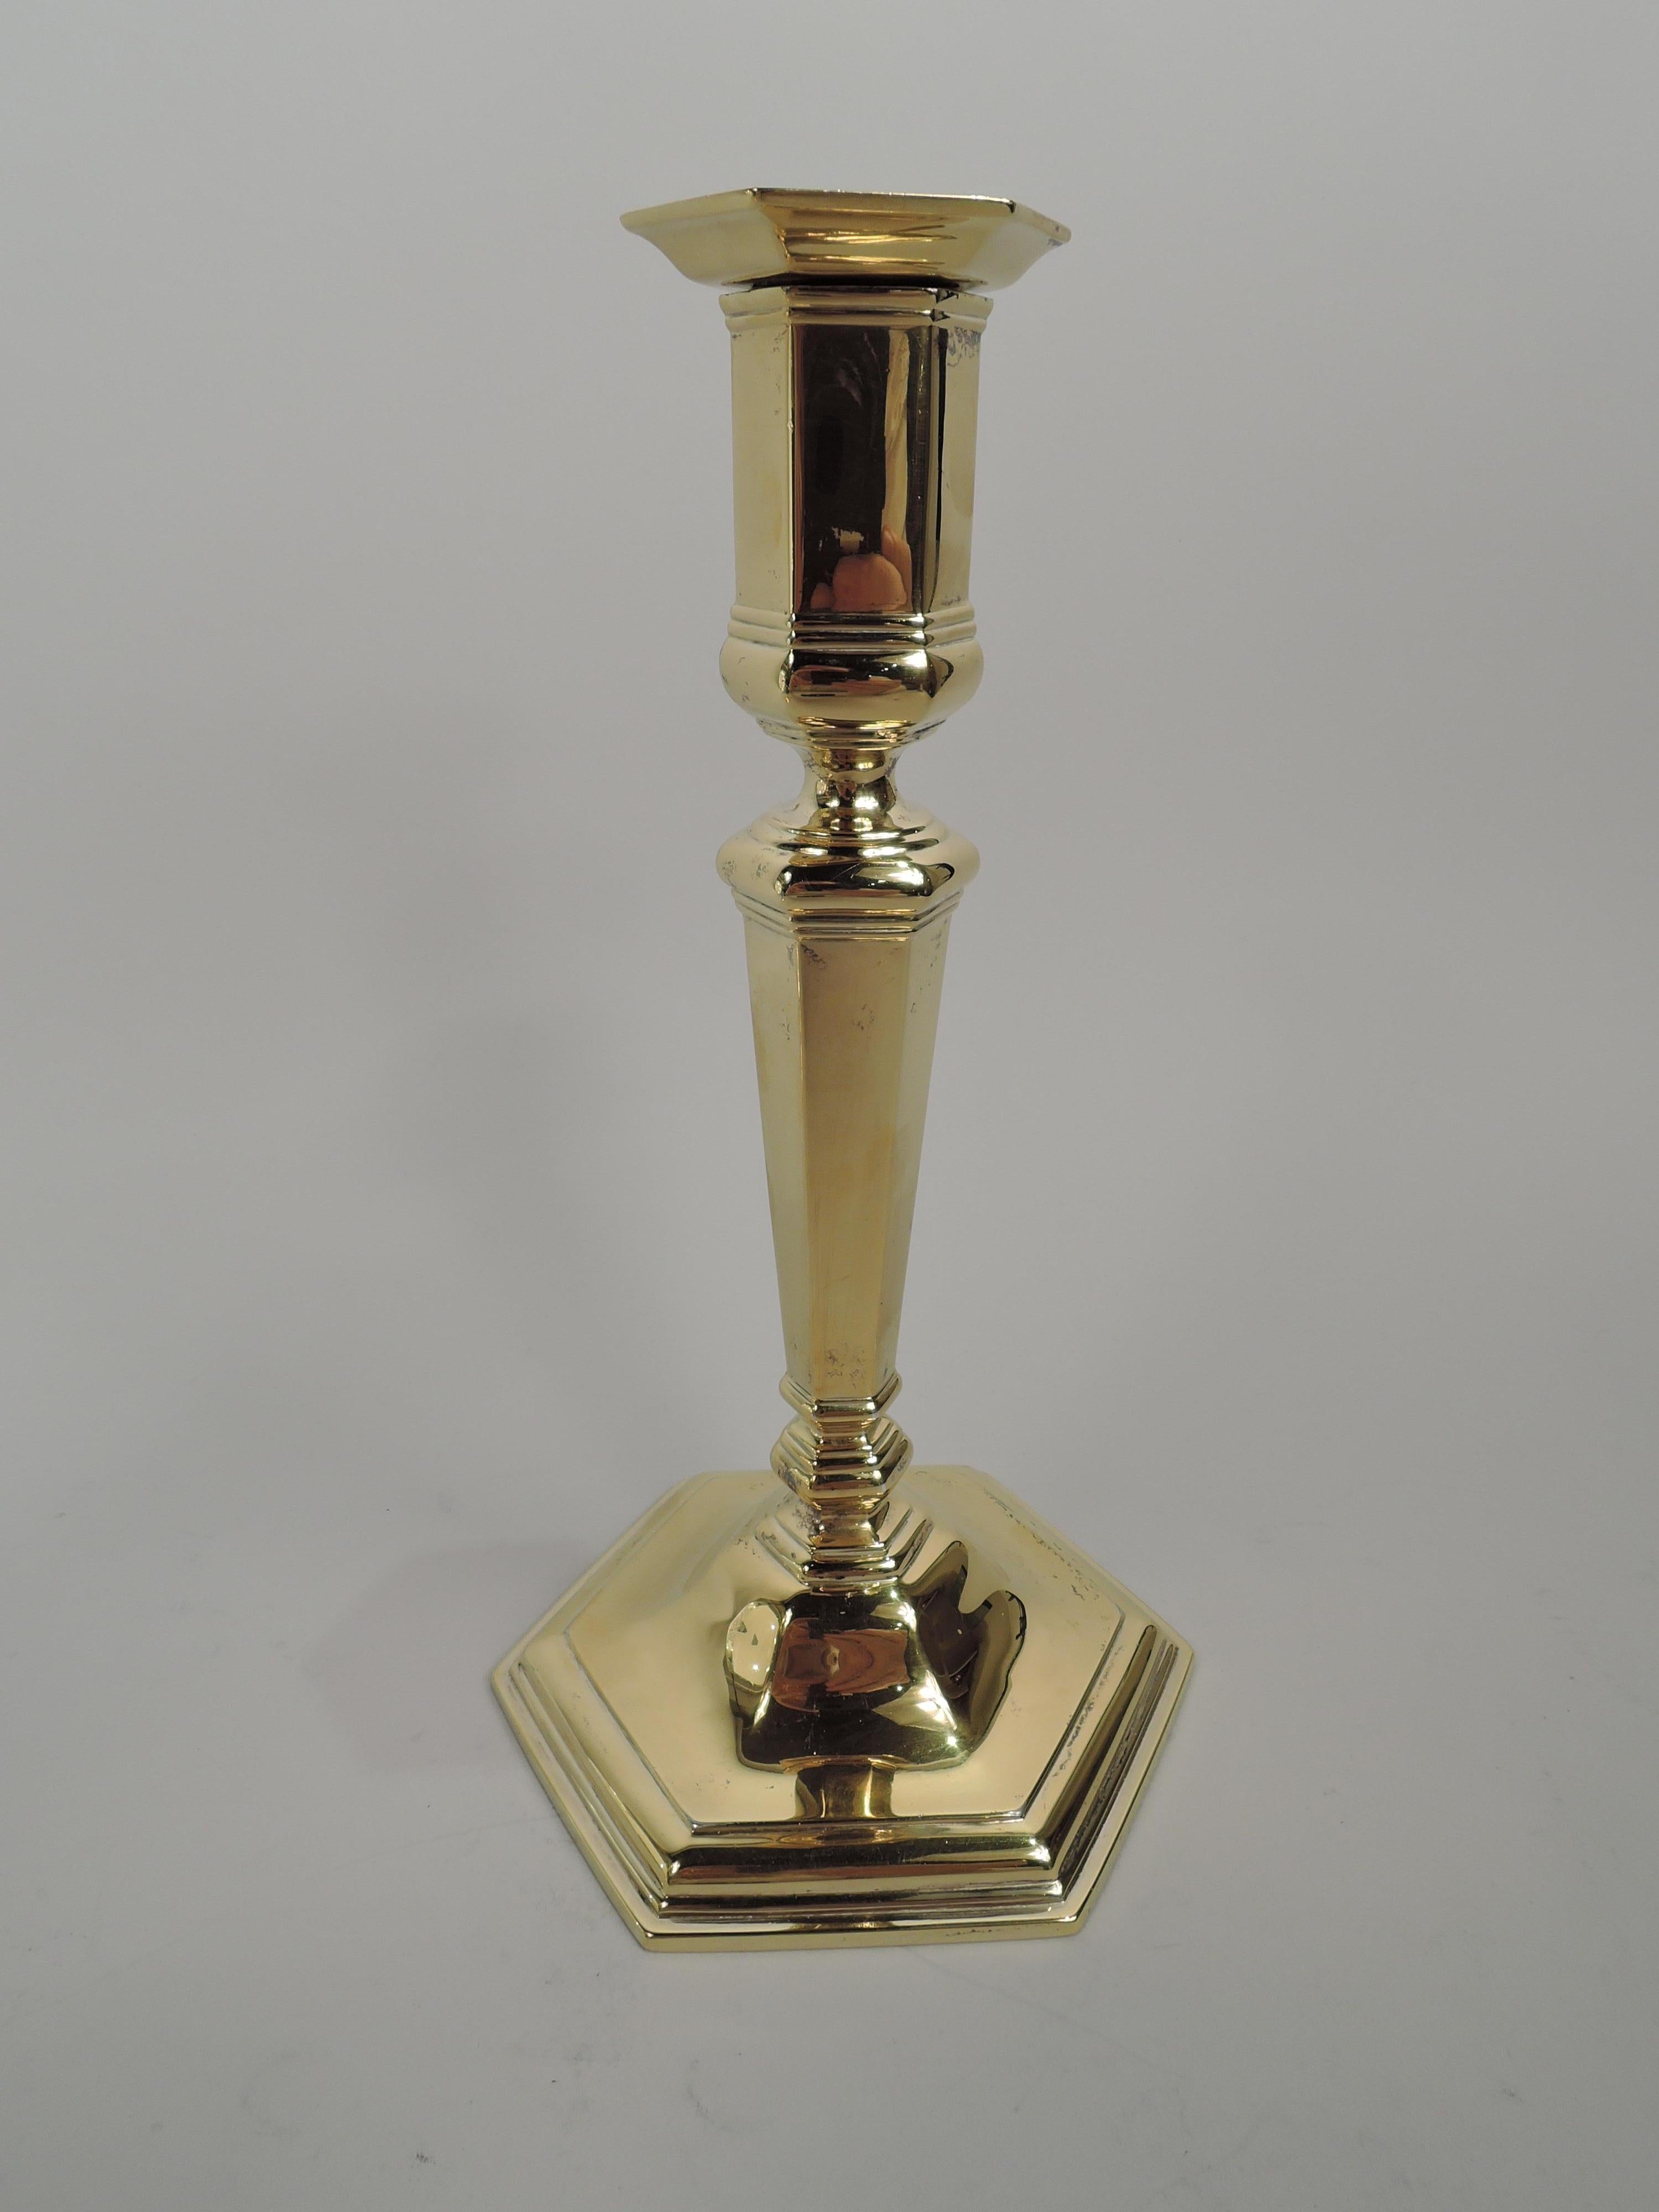 Pair of Edwardian Georgian sterling silver candlesticks. Fabriqué par Tiffany & Co. à New York, ca. 1915. Each: Tapering shaft with base knop on stepped and raised foot. Socket has straight sides and detachable bobeche. Faceted. Traditional form